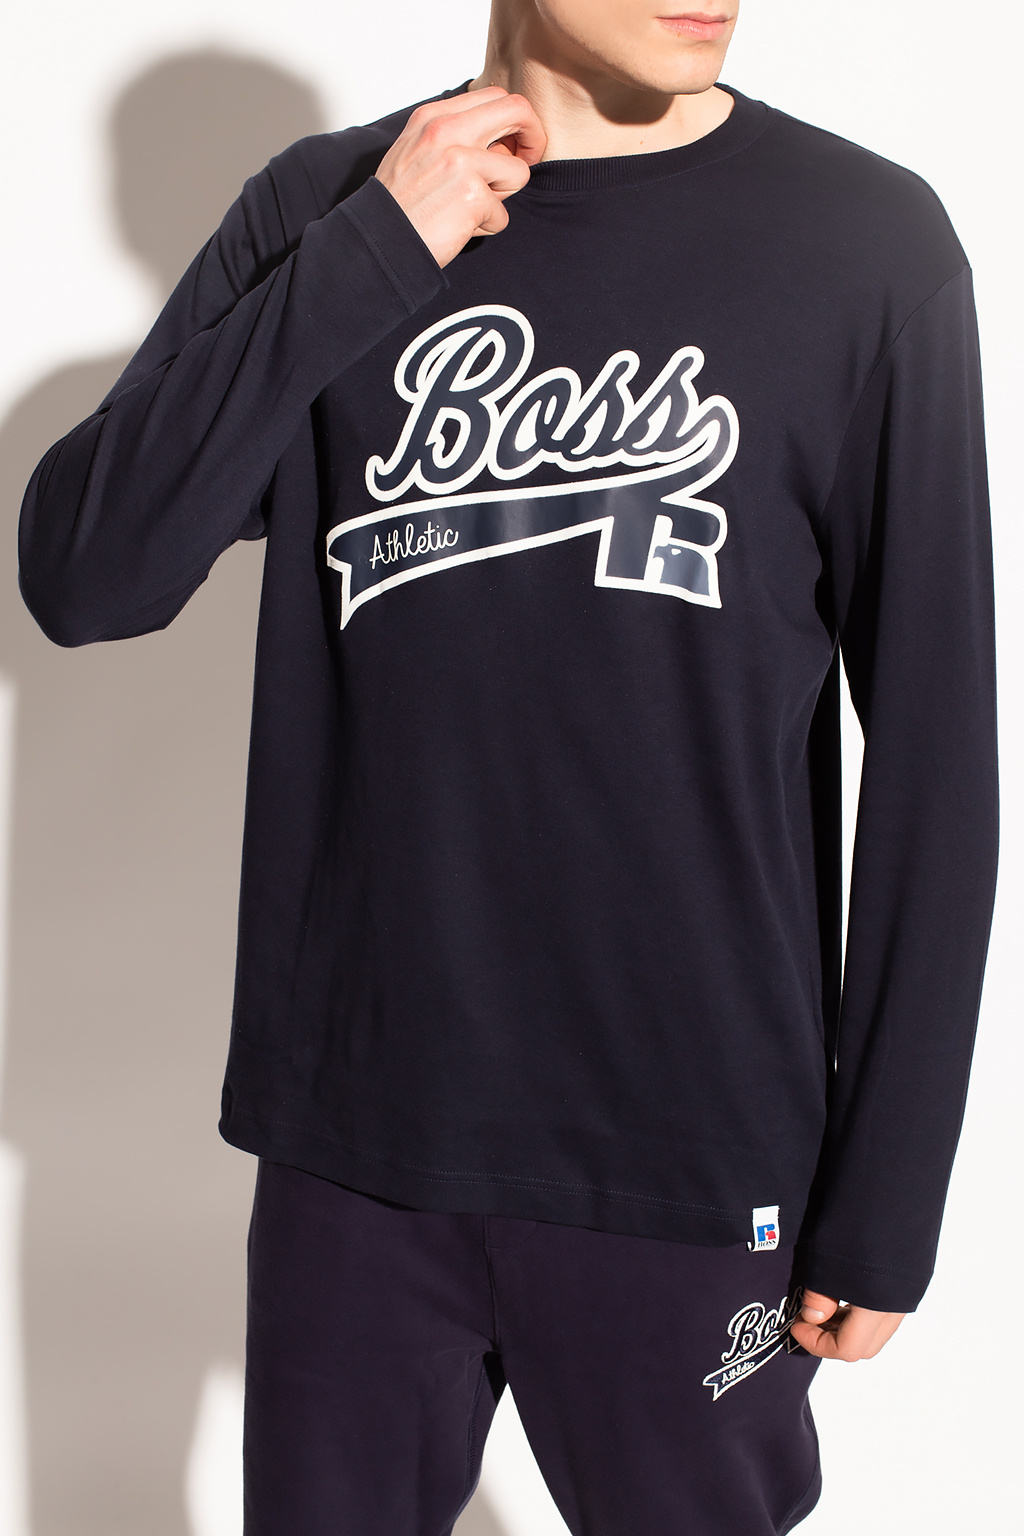 BOSS x Russell Athletic Maisie Wilen Hoodies for Women